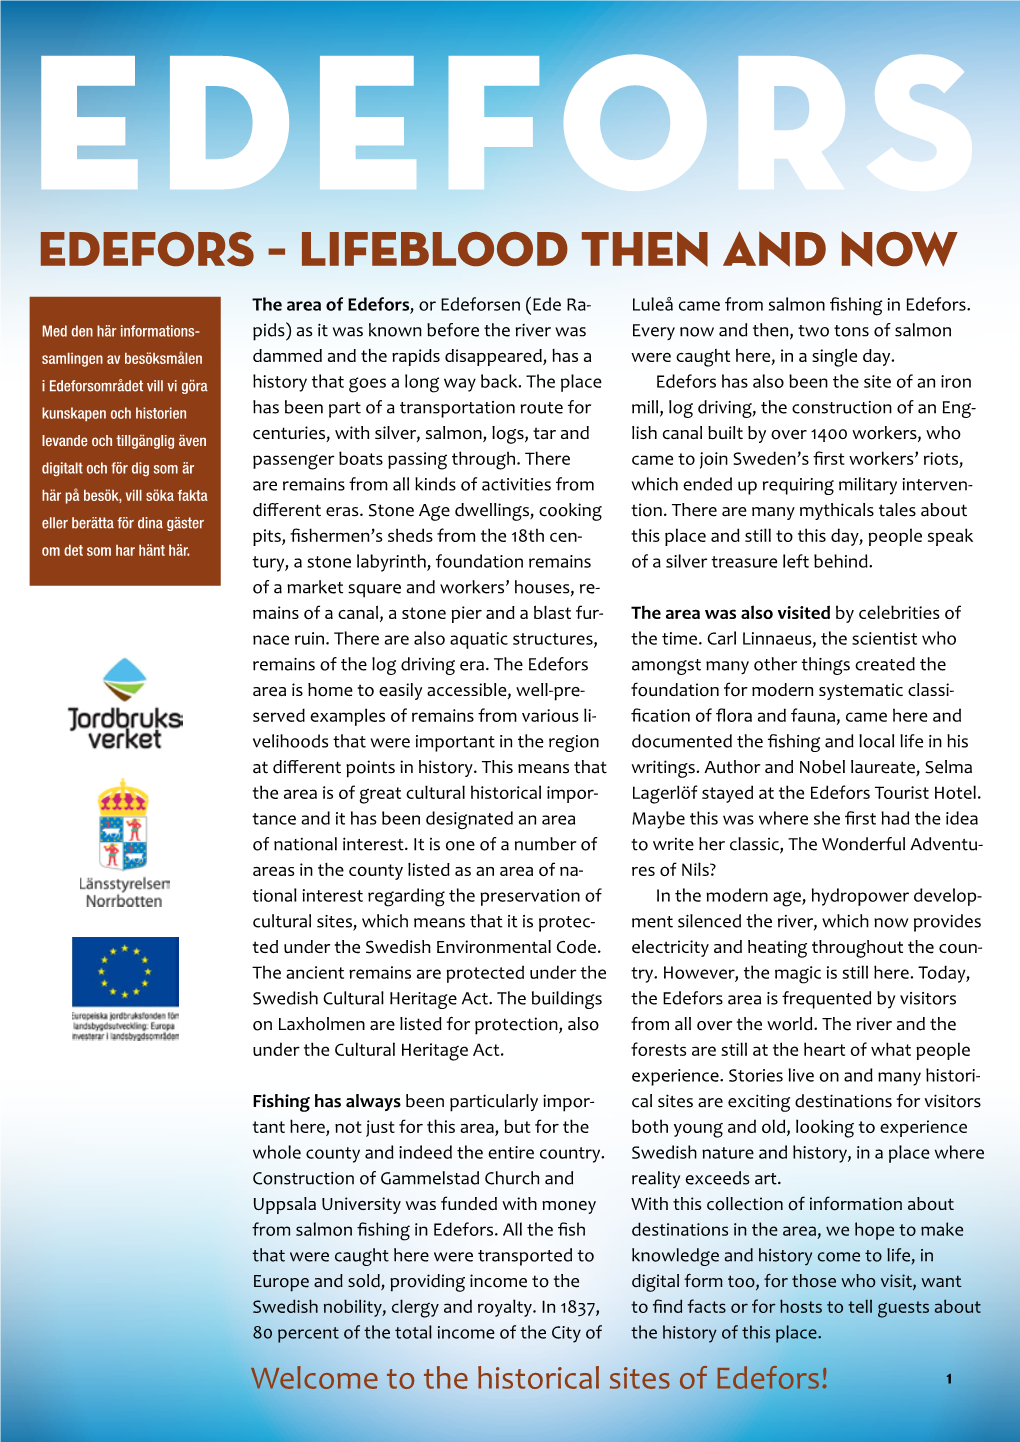 Lifeblood Then and Now the Area of Edefors, Or Edeforsen (Ede Ra- Luleå Came from Salmon Fishing in Edefors